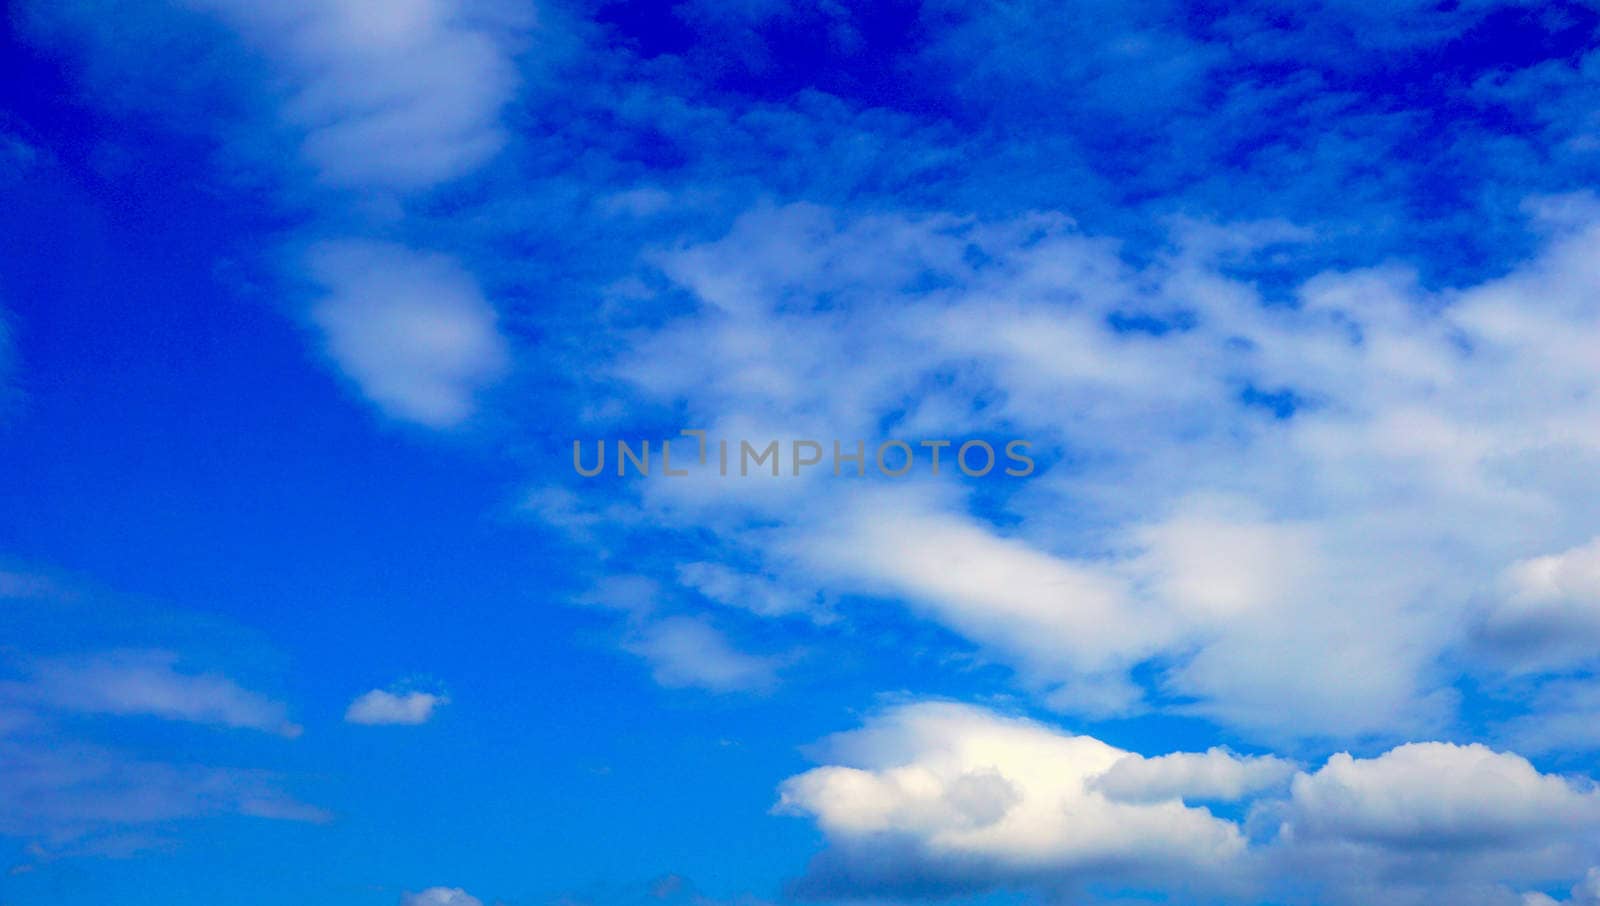 Sky blue and clouds background by polarbearstudio